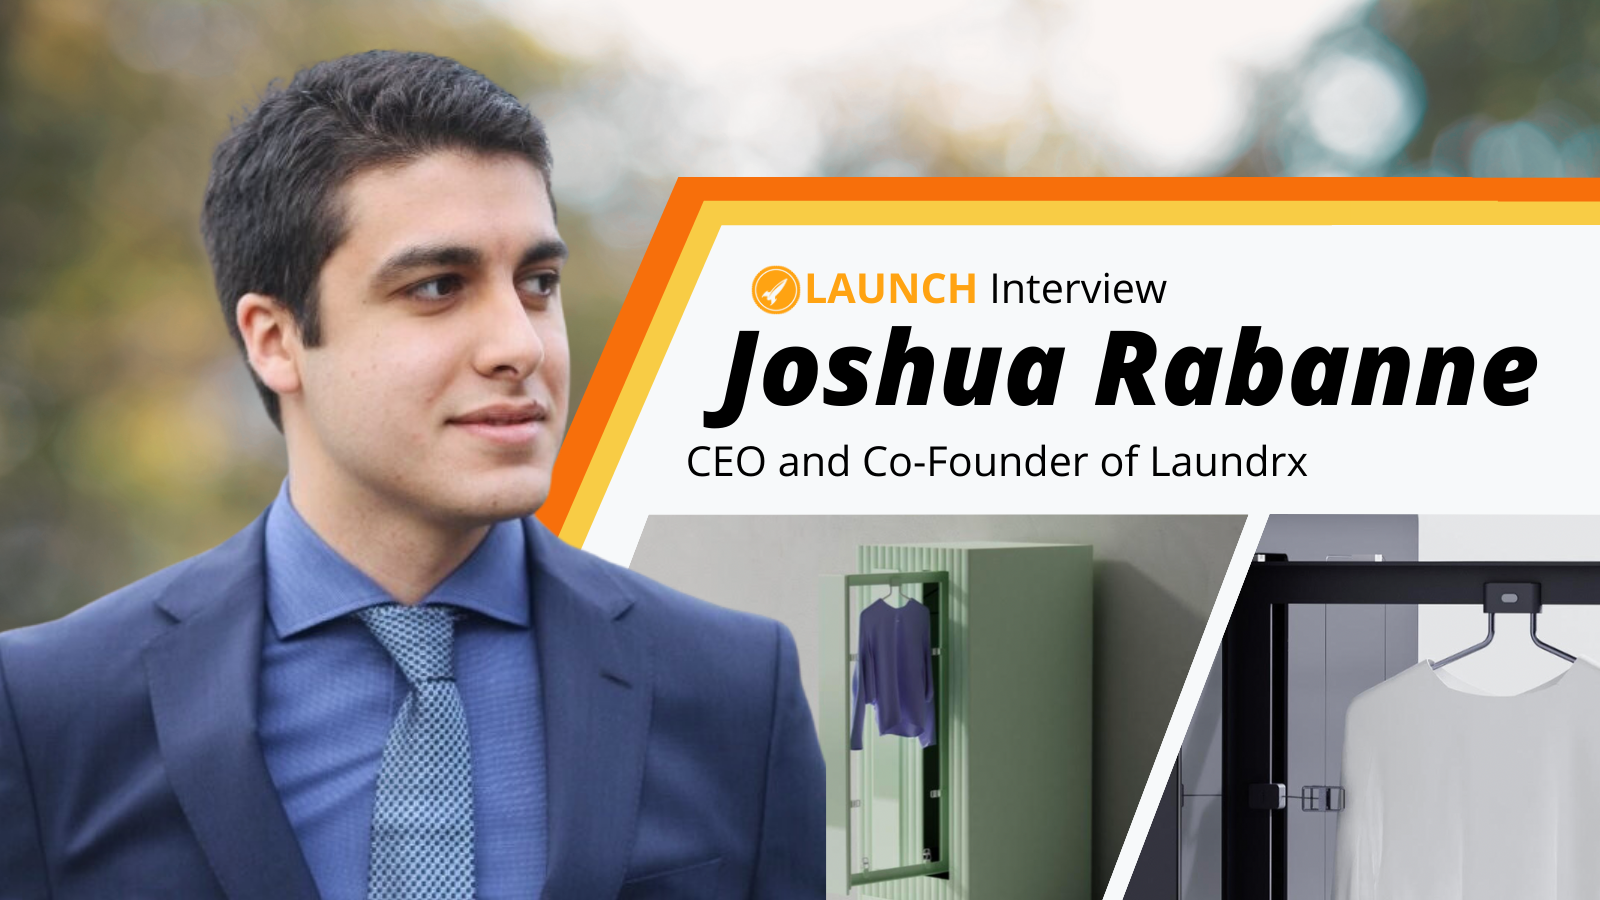 Creating the World’s First Laundry Robot — Joshua Rabanne, Laundrx